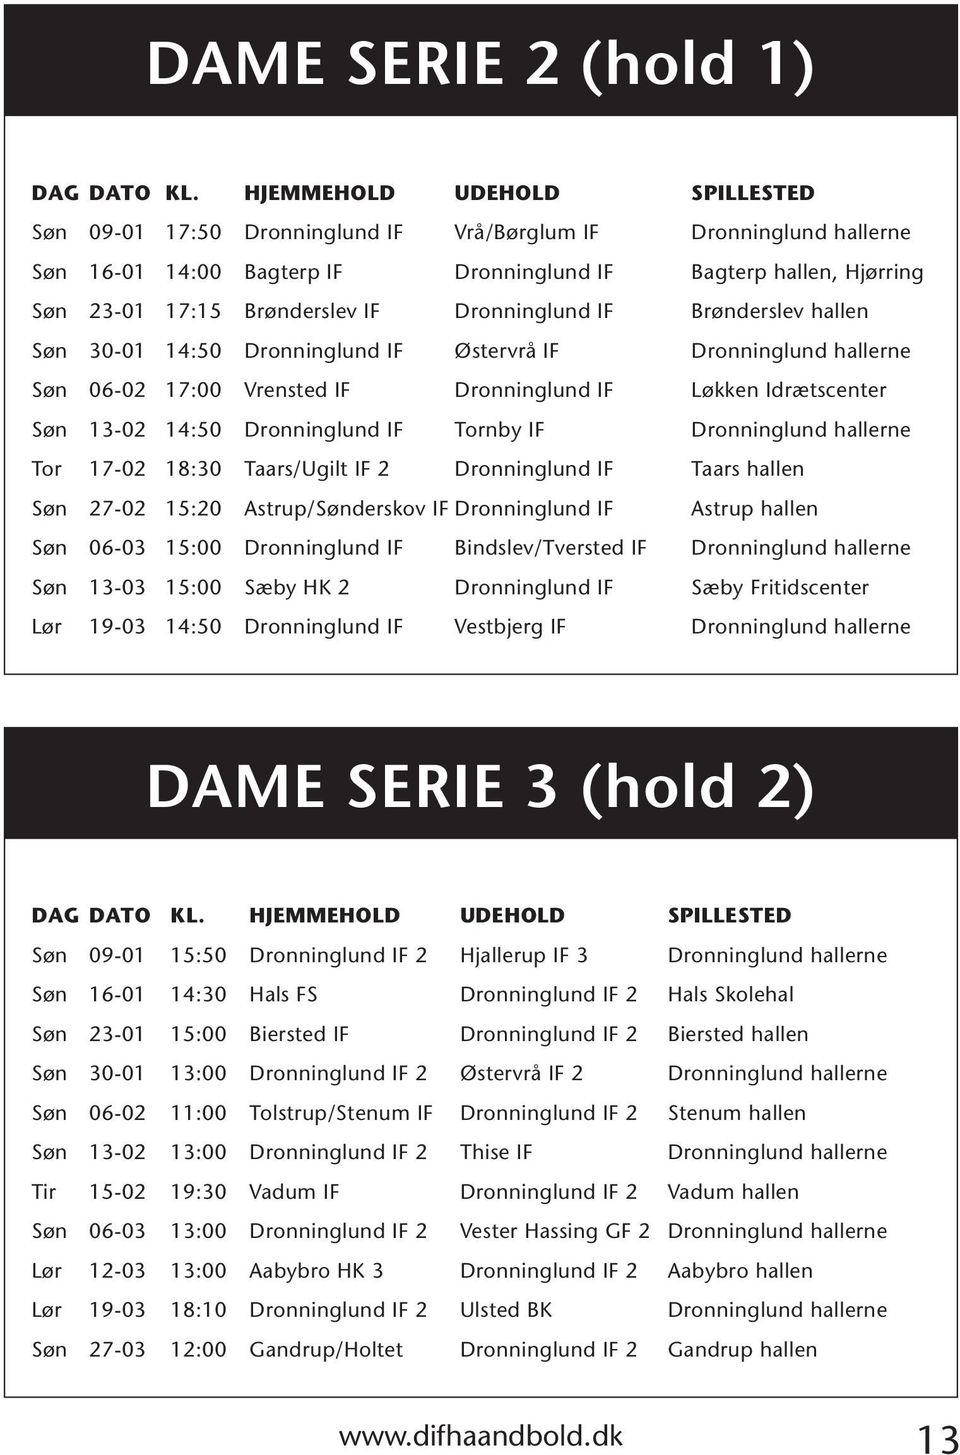 Tornby IF Dronninglund hallerne Tor 17-02 18:30 Taars/Ugilt IF 2 Dronninglund IF Taars hallen Søn 27-02 15:20 Astrup/Sønderskov IF Dronninglund IF Astrup hallen Søn 06-03 15:00 Dronninglund IF